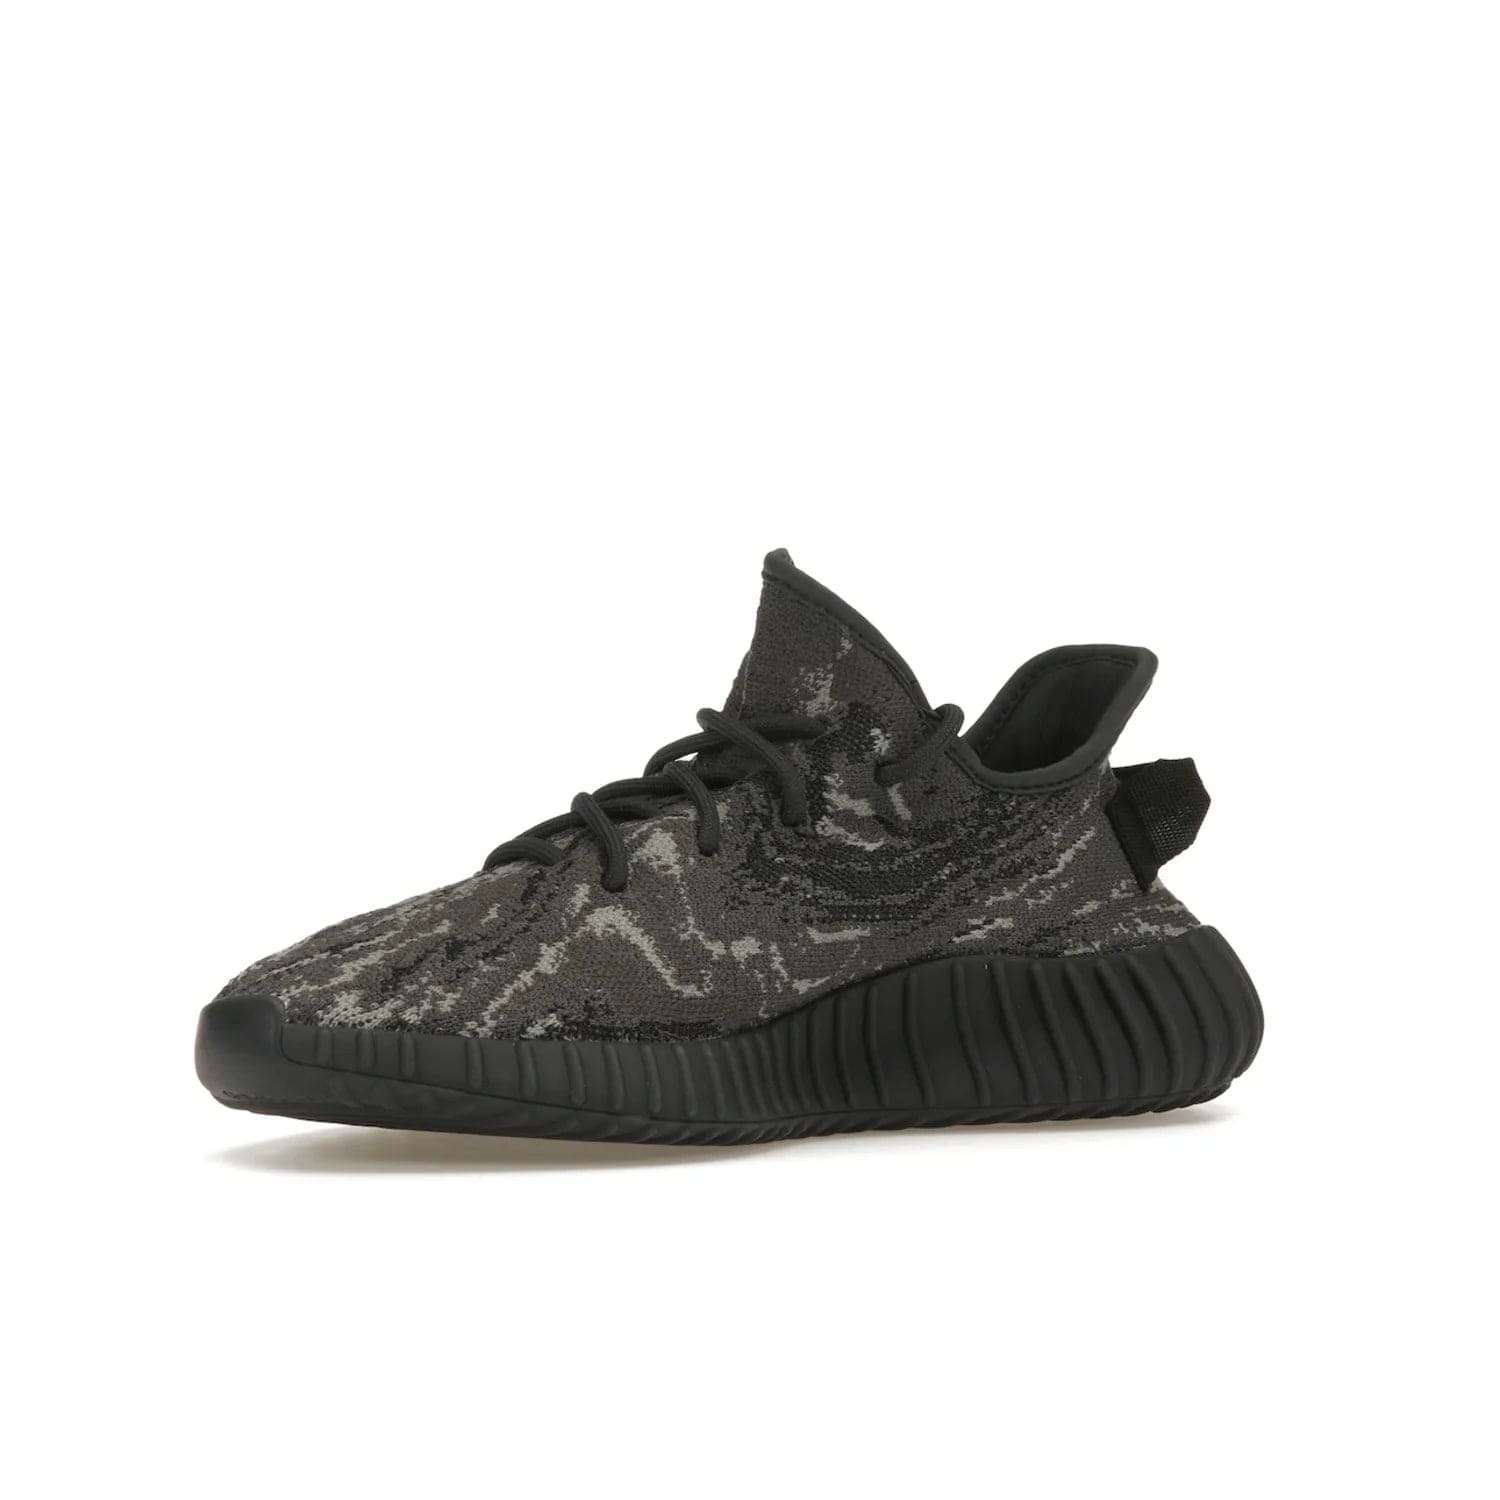 adidas Yeezy Boost 350 V2 MX Dark Salt - Image 16 - Only at www.BallersClubKickz.com - ##
The adidas Yeezy Boost 350 V2 MX Dark Salt offers a contemporary look with a signature combination of grey and black hues. Cushioned Boost midsole and side stripe allow for all day wear. Get the perfect fashion-forward addition with this sleek sneaker for $230.